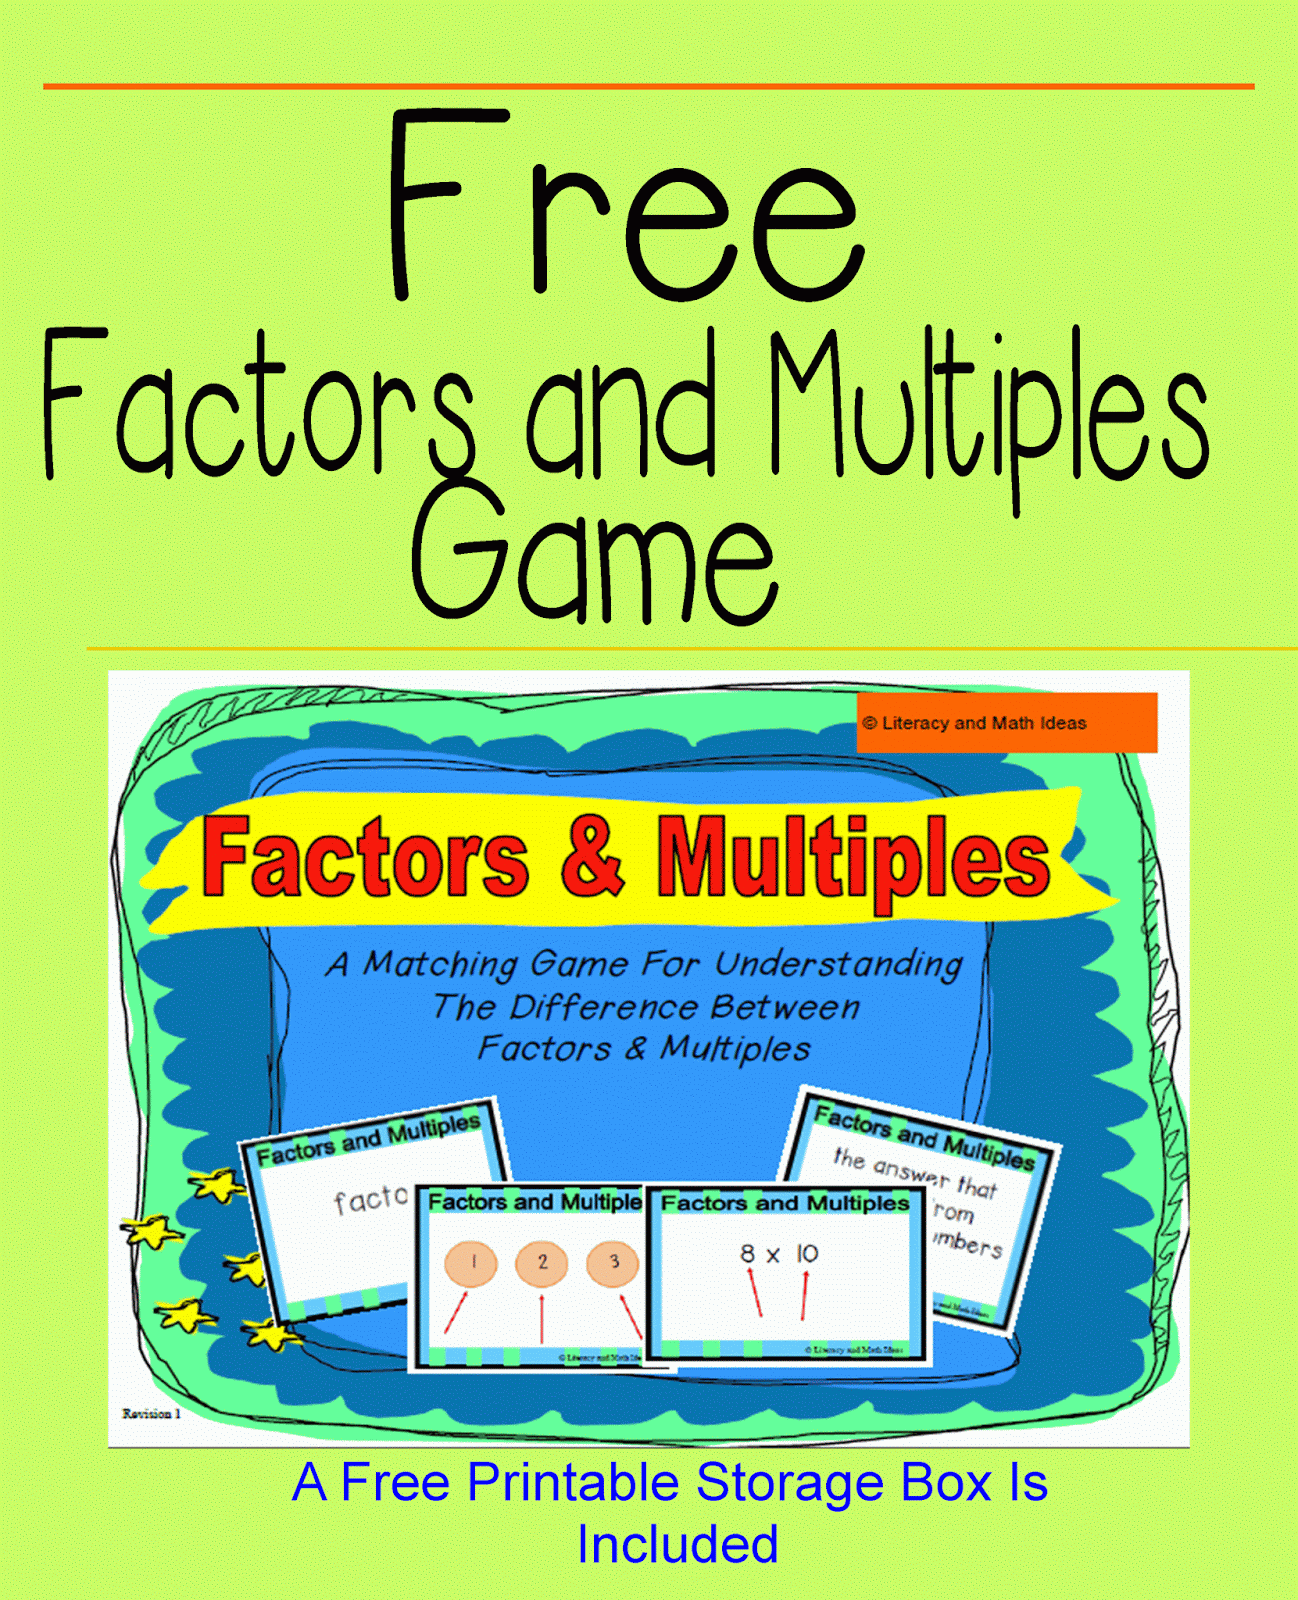 math-games-using-dice-the-multiple-game-2-to-12bw-gif-1-000-1-294-pixels-multiplication-games